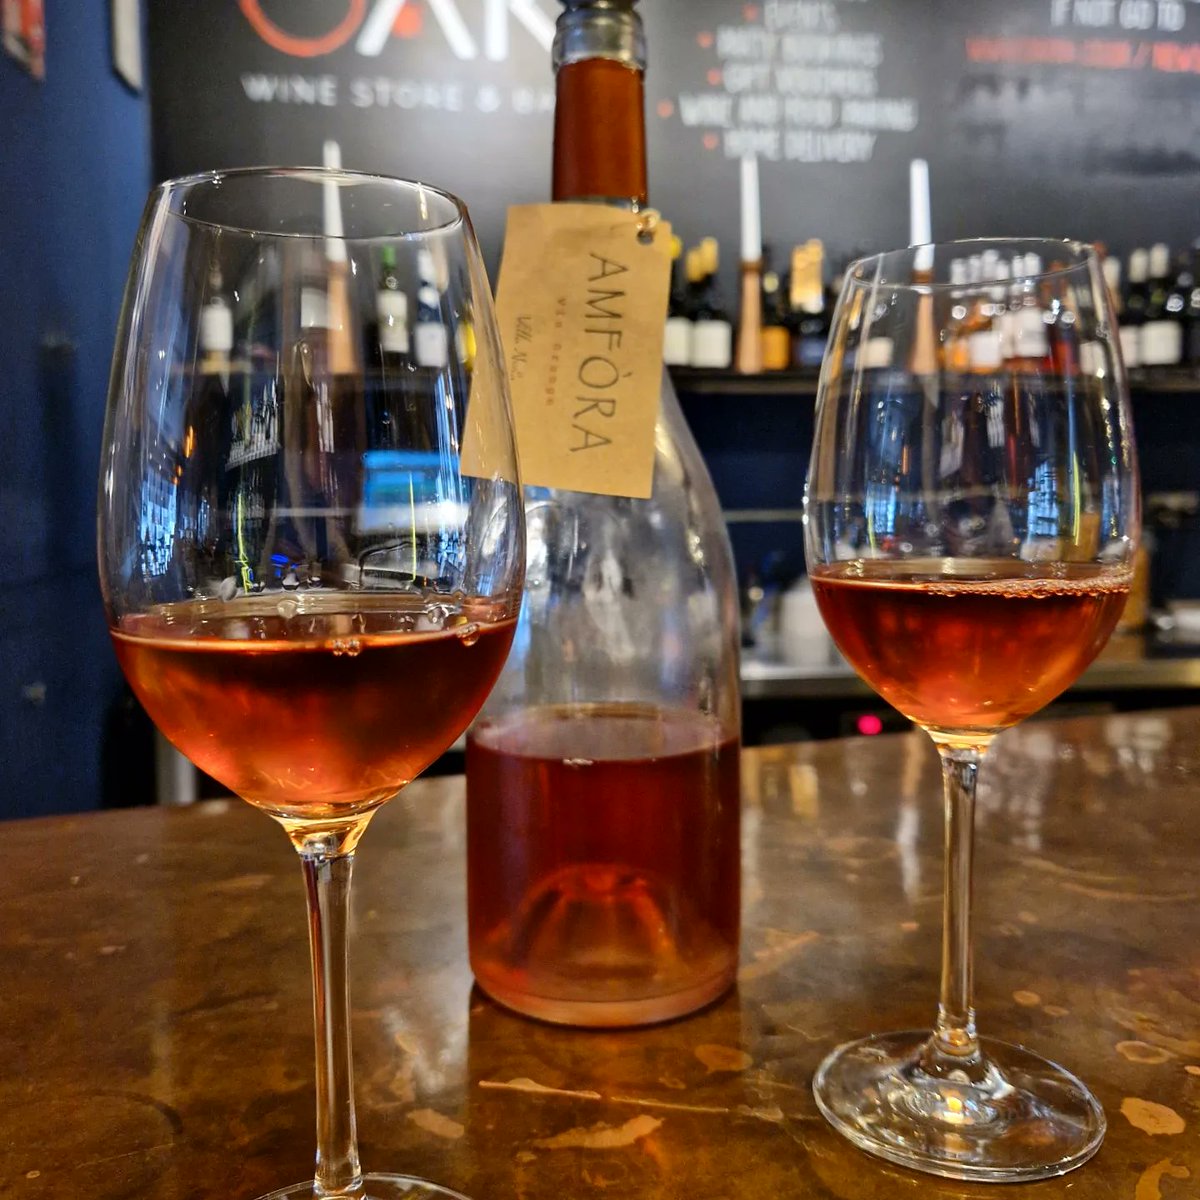 This colour! 😍🧡

Villa Noria 'Amfòra' is a gorgeous #orangewine created with a blend of several varieties - all grown organically or biodynamically. 🍇 A #naturalwine, this has one of the lowest levels of sulphites we've come across 😇

Pop in and give it a try!

#theplacetobe